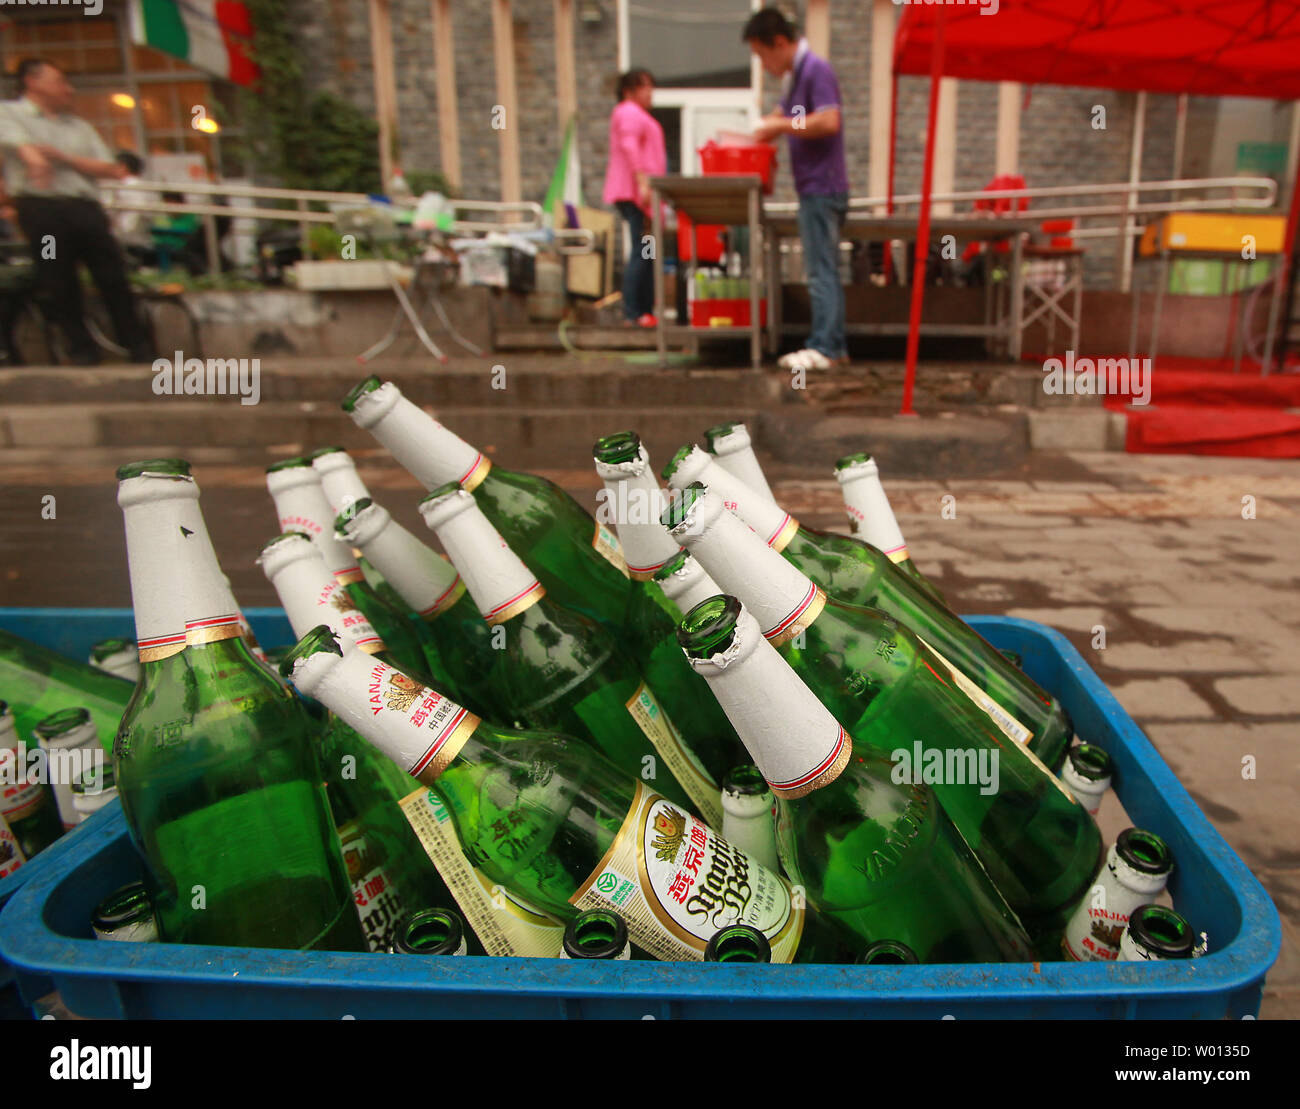 Empty bottles of beer are placed on a curb outside a restaurant  in Beijing on June 7, 2013.  Global alcohol consumption continued to climb in 2012 and 2013 with China remaining the world's top market as well as the fastest-growing imbibing nation, according to a recent international report.      UPI/Stephen Shaver Stock Photo